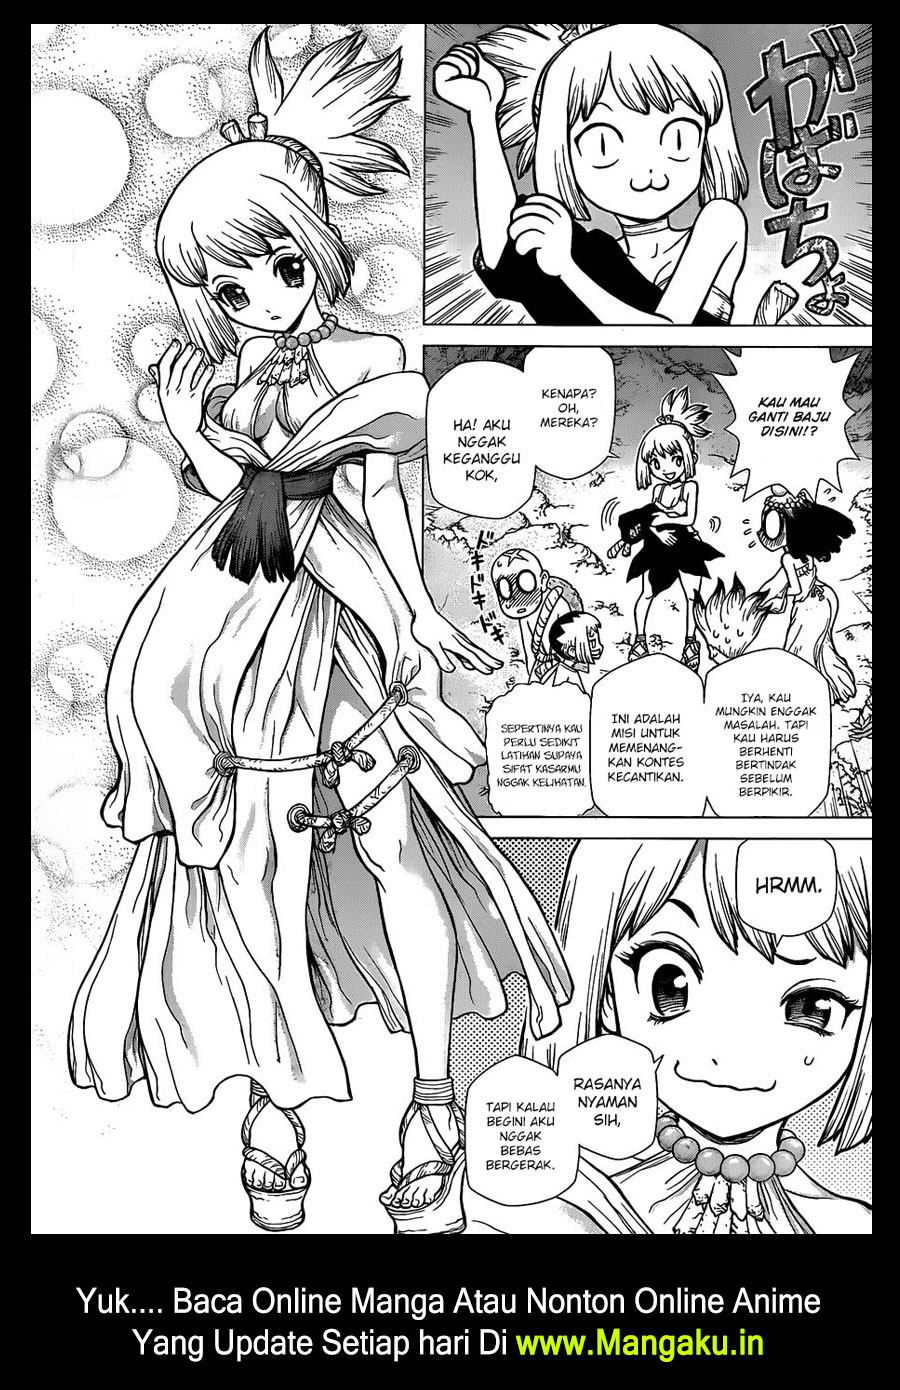 Dr. Stone Chapter 107